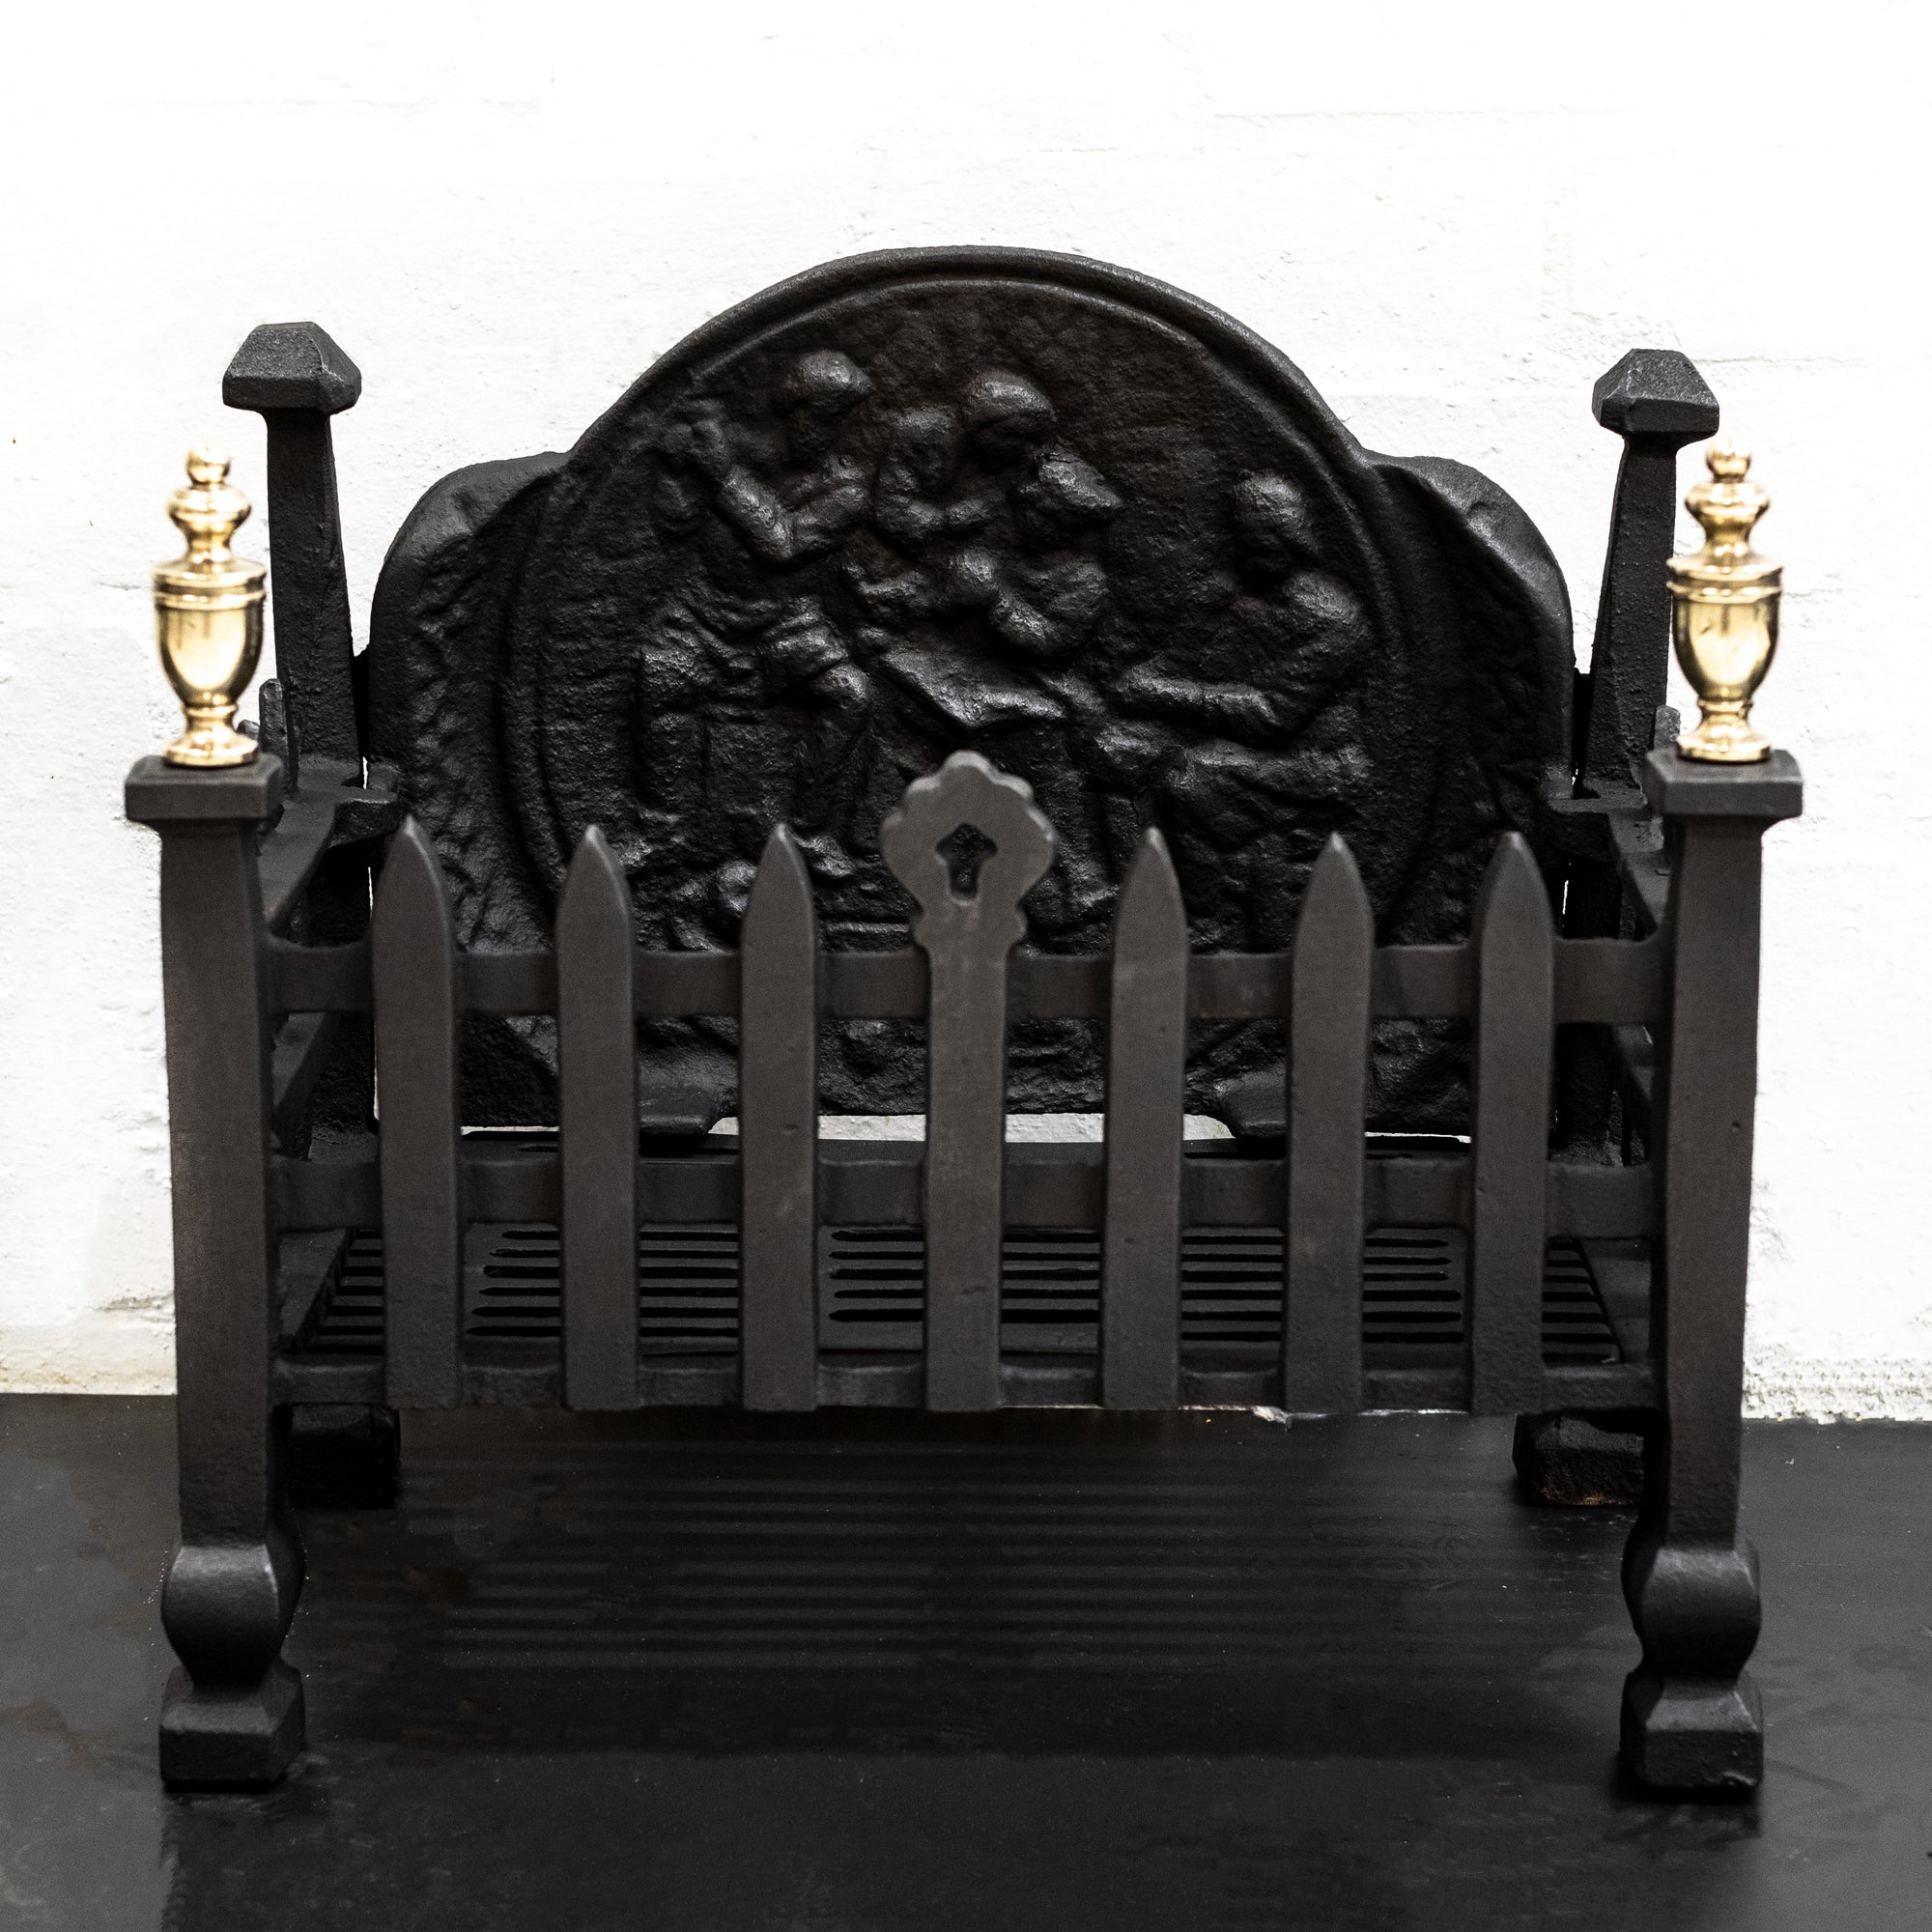 Reclaimed Cast Iron Fire Basket with Finials | The Architectural Forum